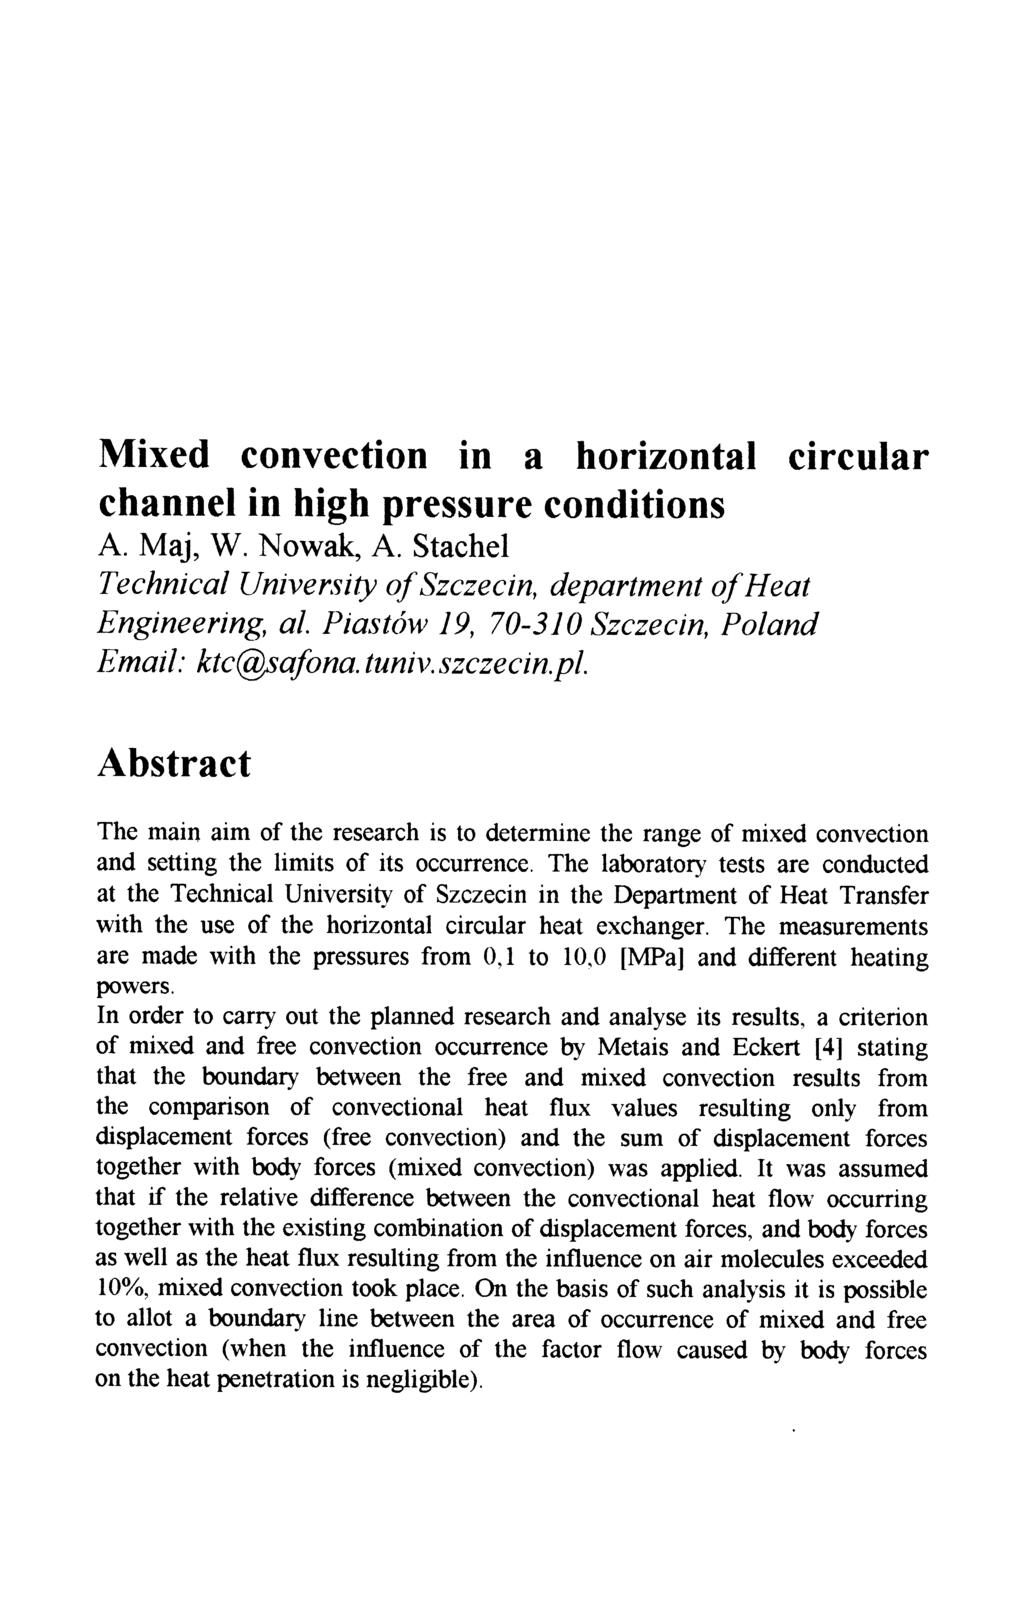 Mixed convection in a horizontal circular channel in high pressure conditions A. Maj, W. Nowak, A.